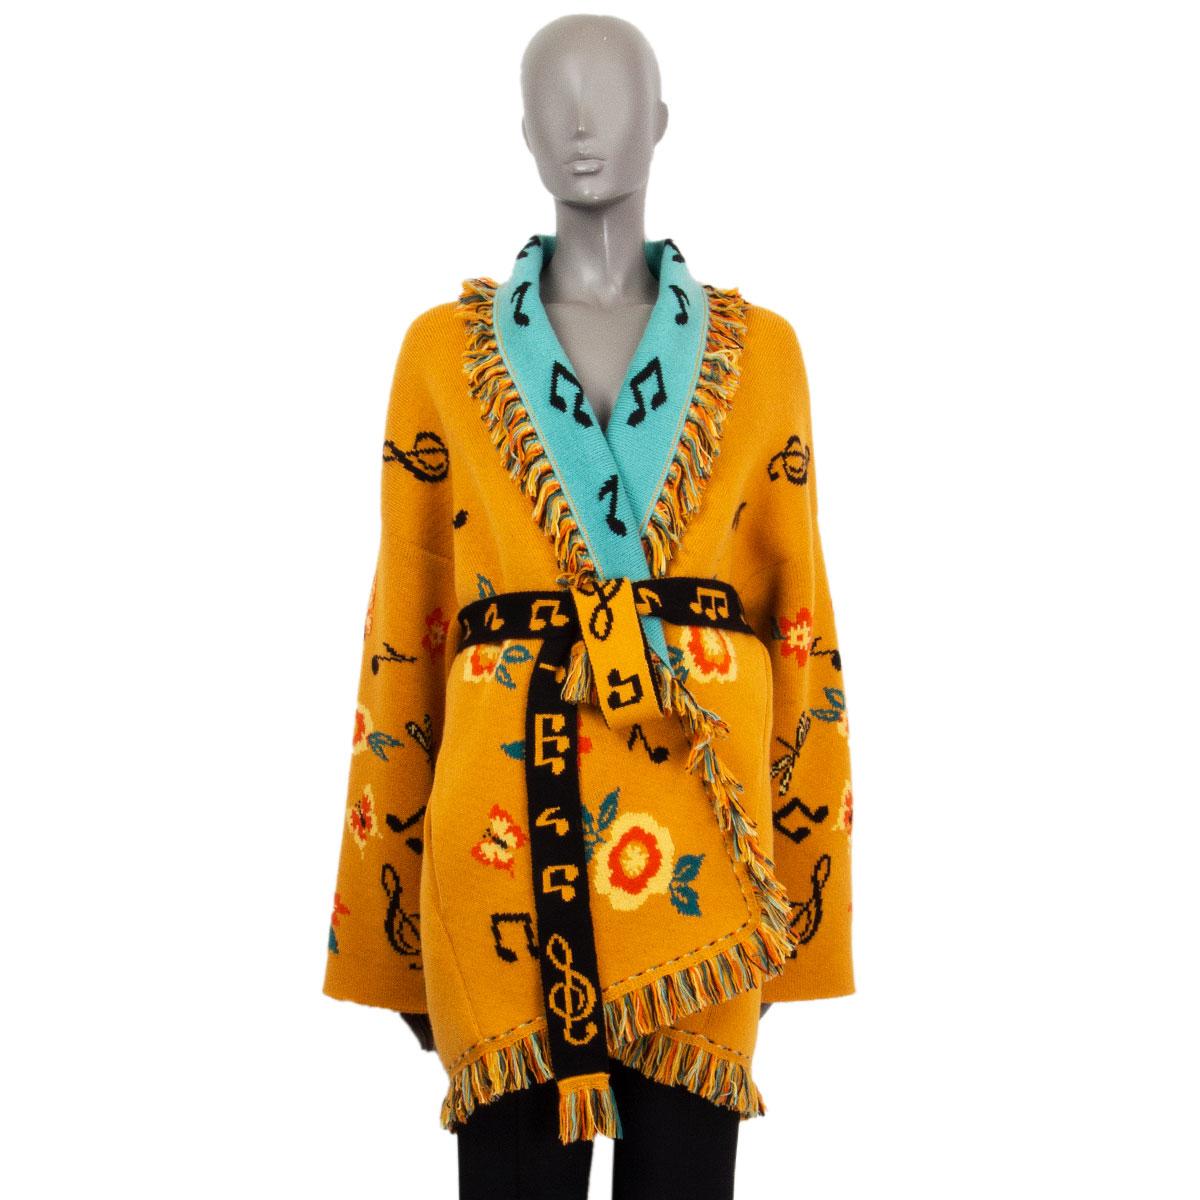 100% authentic Alanui 'Sweetheart' floral and music-note jacquard cardigan with fringe border trim in Mogul Orange cashmere (100%) with details in mustard, turquoise, black, and yellow. Fringed shawl collar, drop shoulder and two slit pockets on the